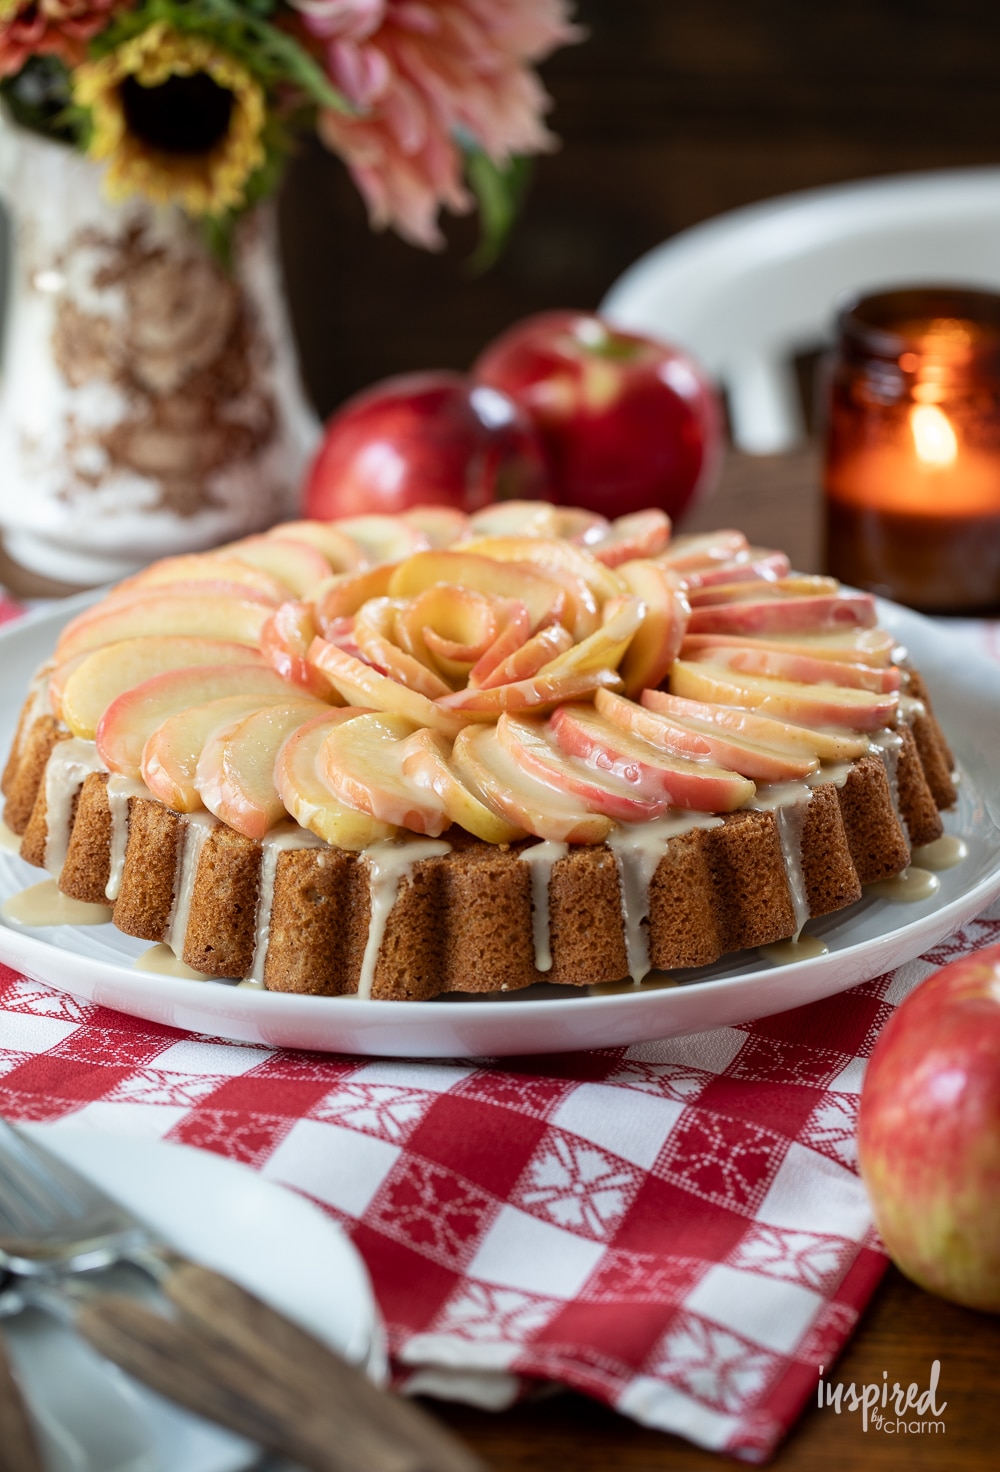 fresh apple cake arranged on a table with flowers, candle, and fresh apples.